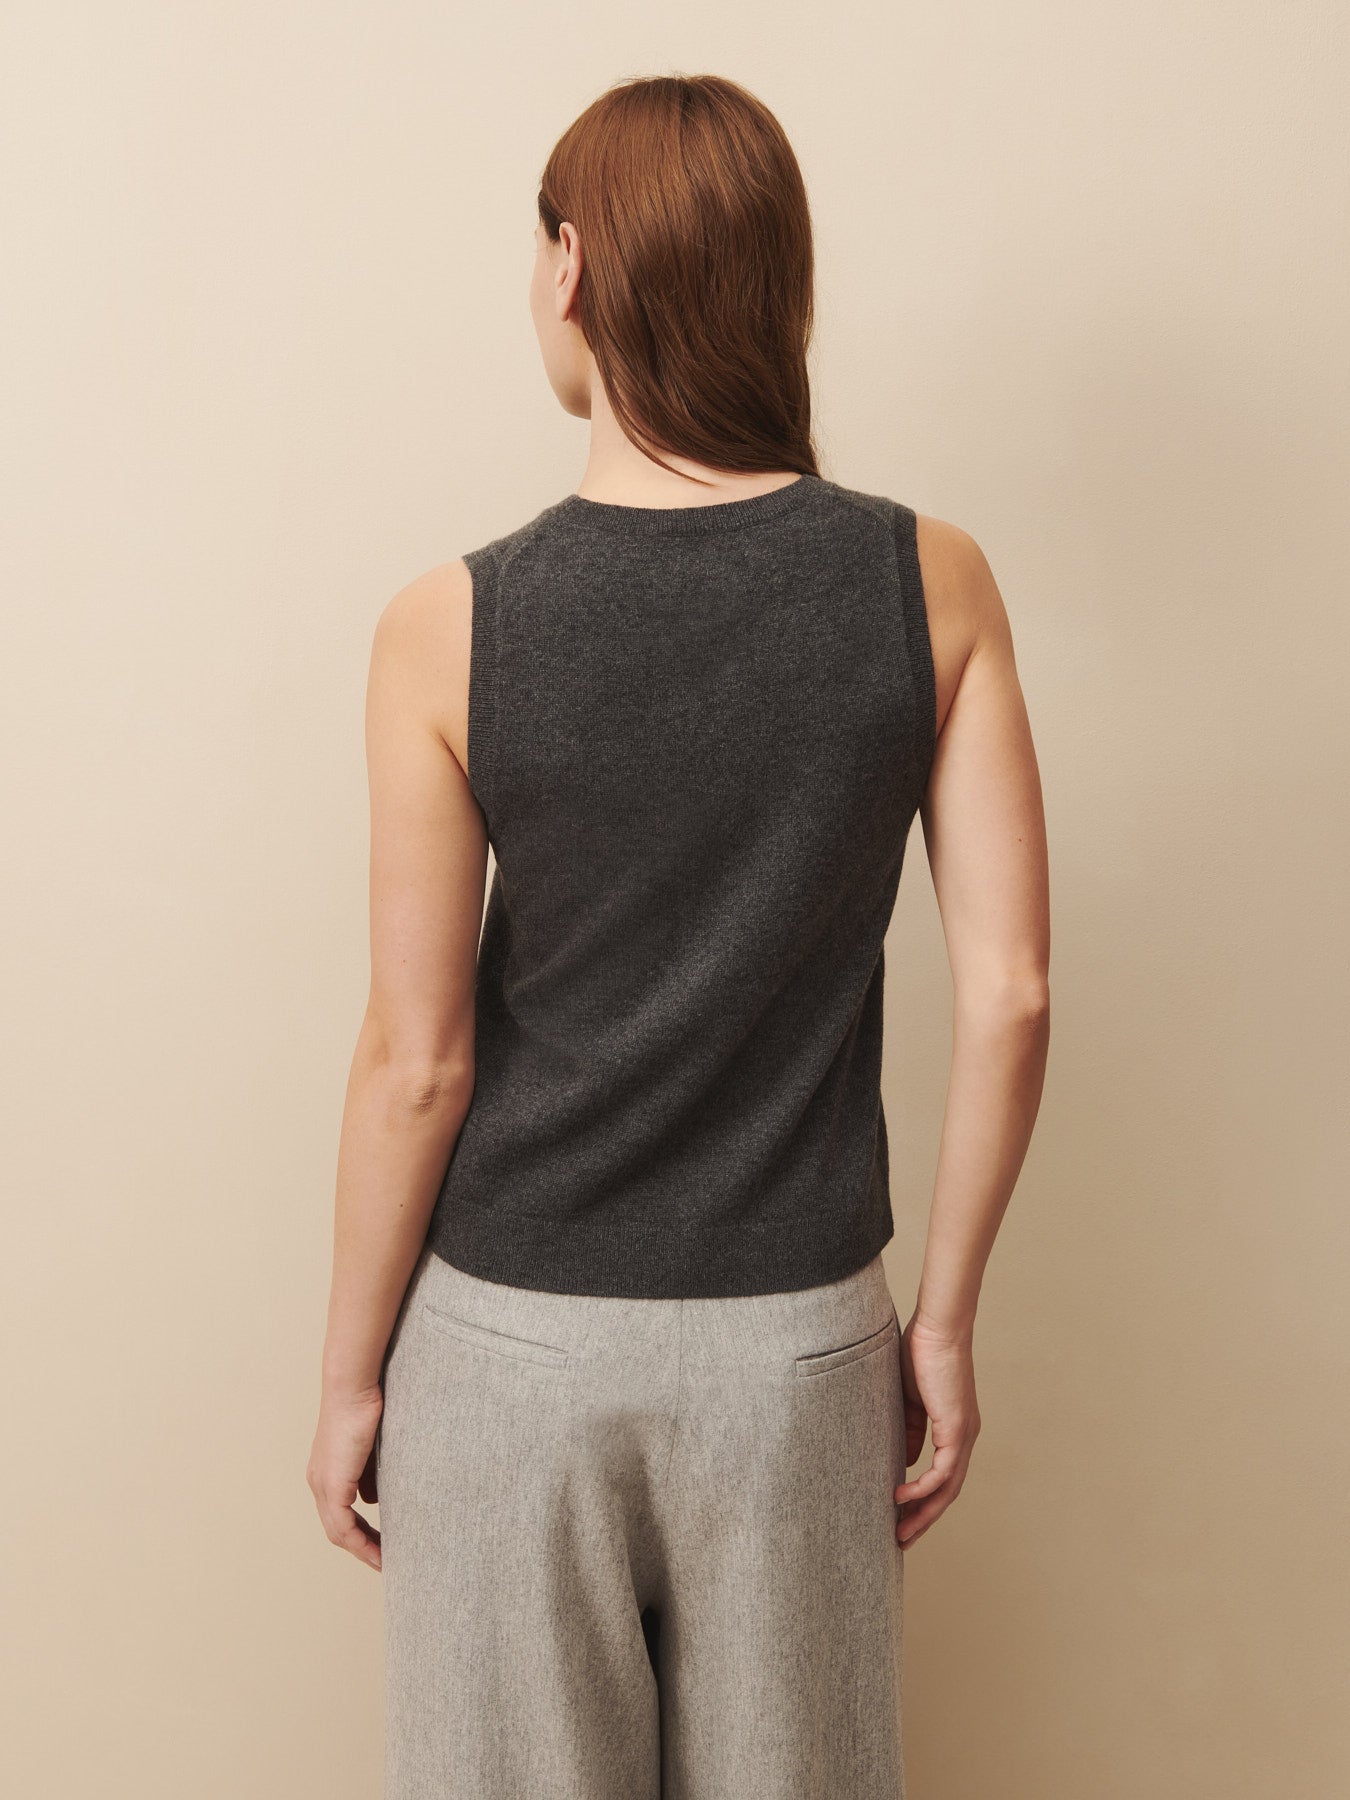 TWP Charcoal Jenny's Tank in cashmere view 6